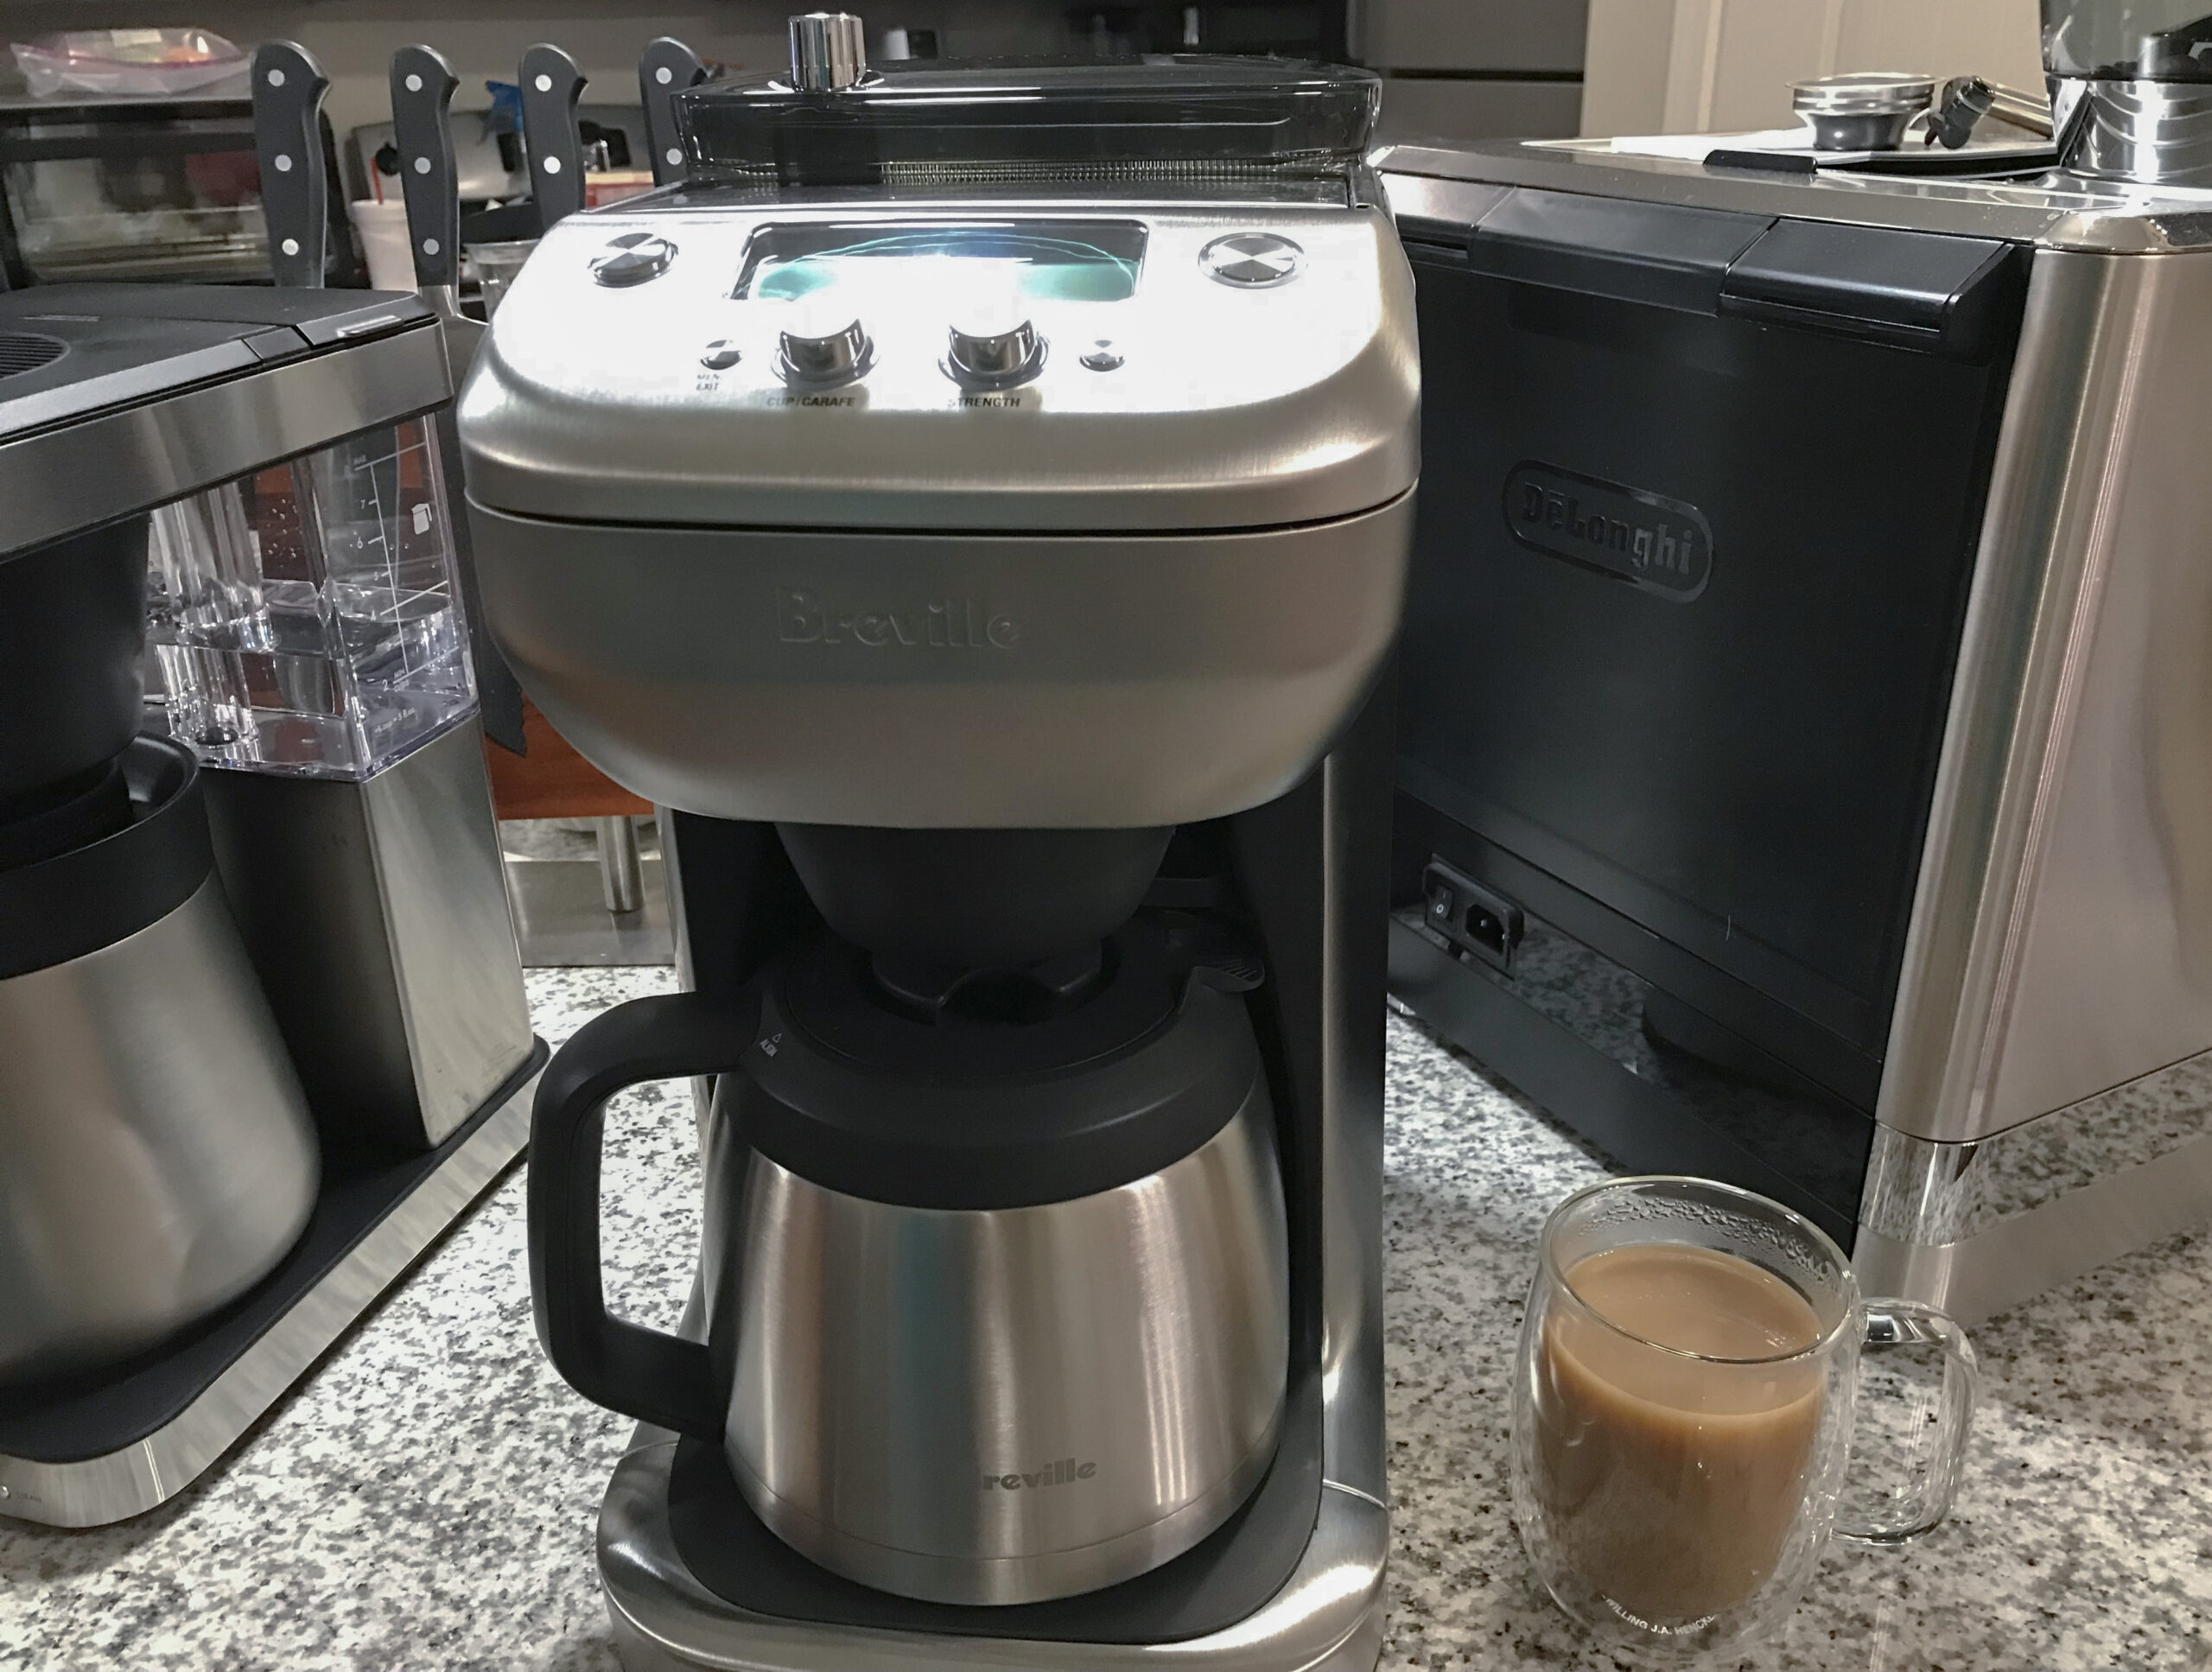 Breville Grind Control best with grinder chrome drip coffee maker on a crowded kitchen counter